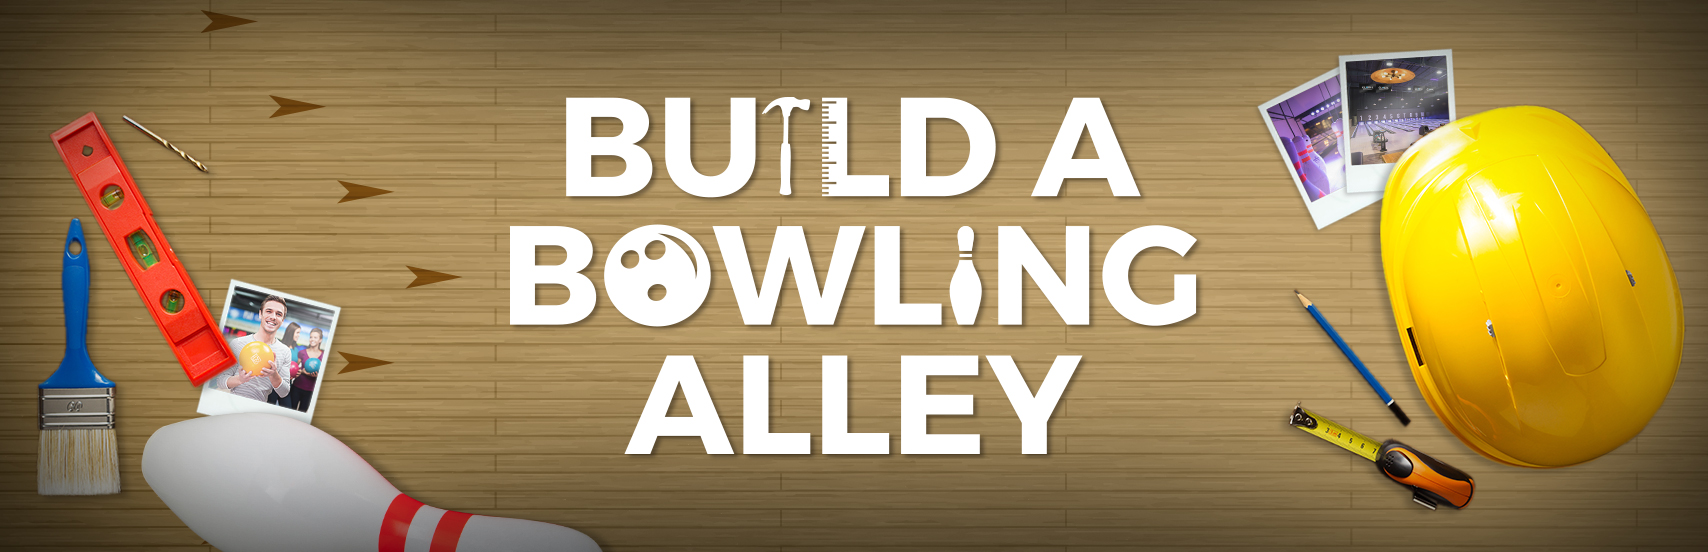 Build A Bowling Alley